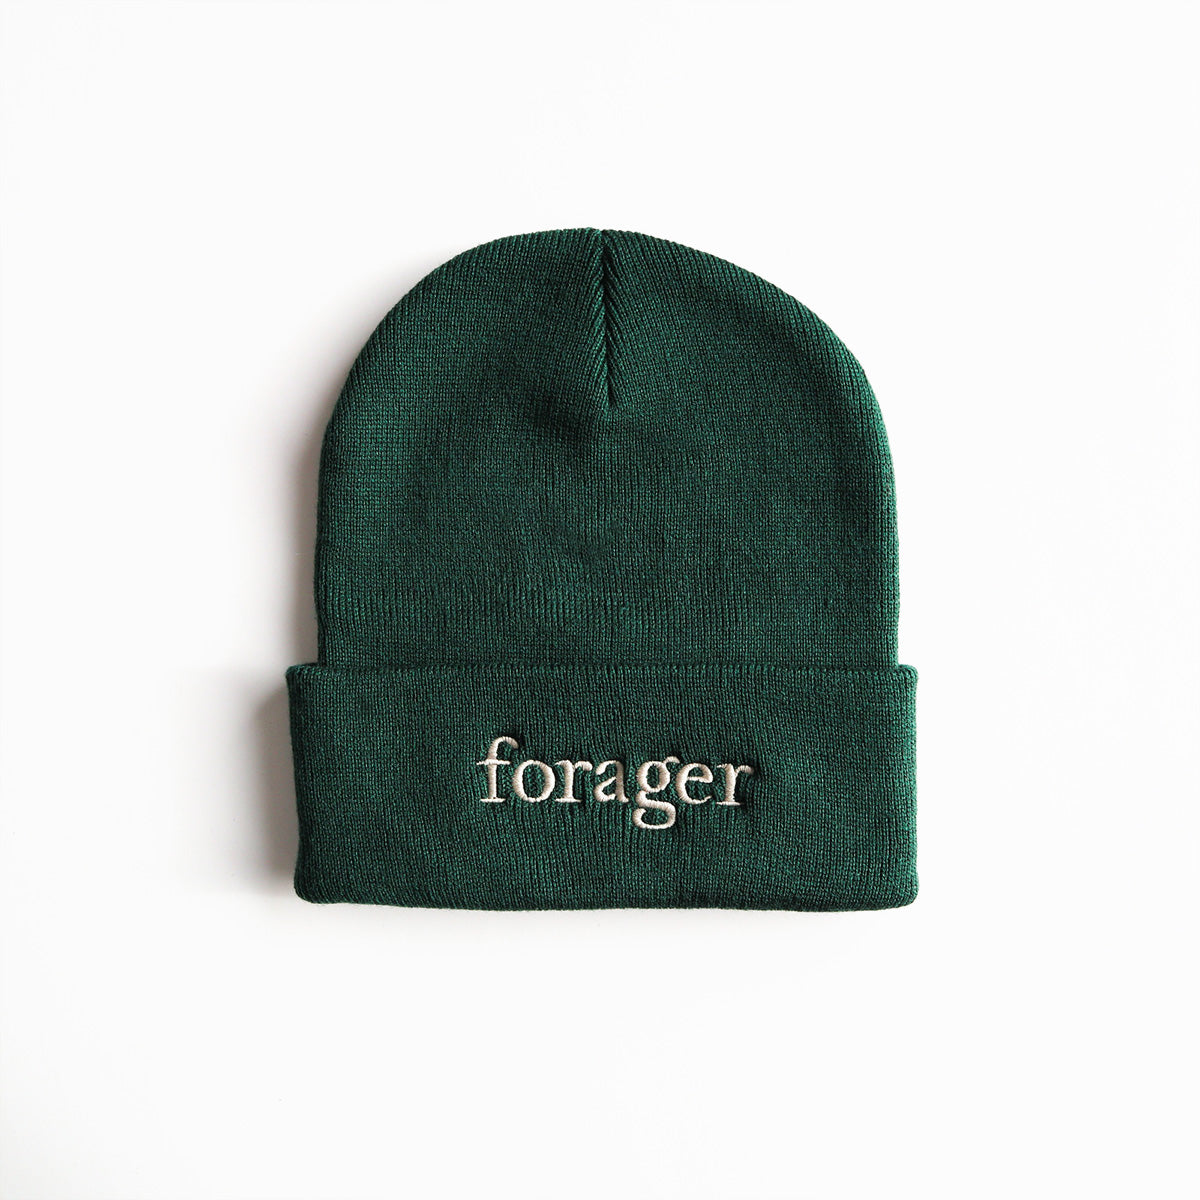 A green beanie with the word "forager" on it. 